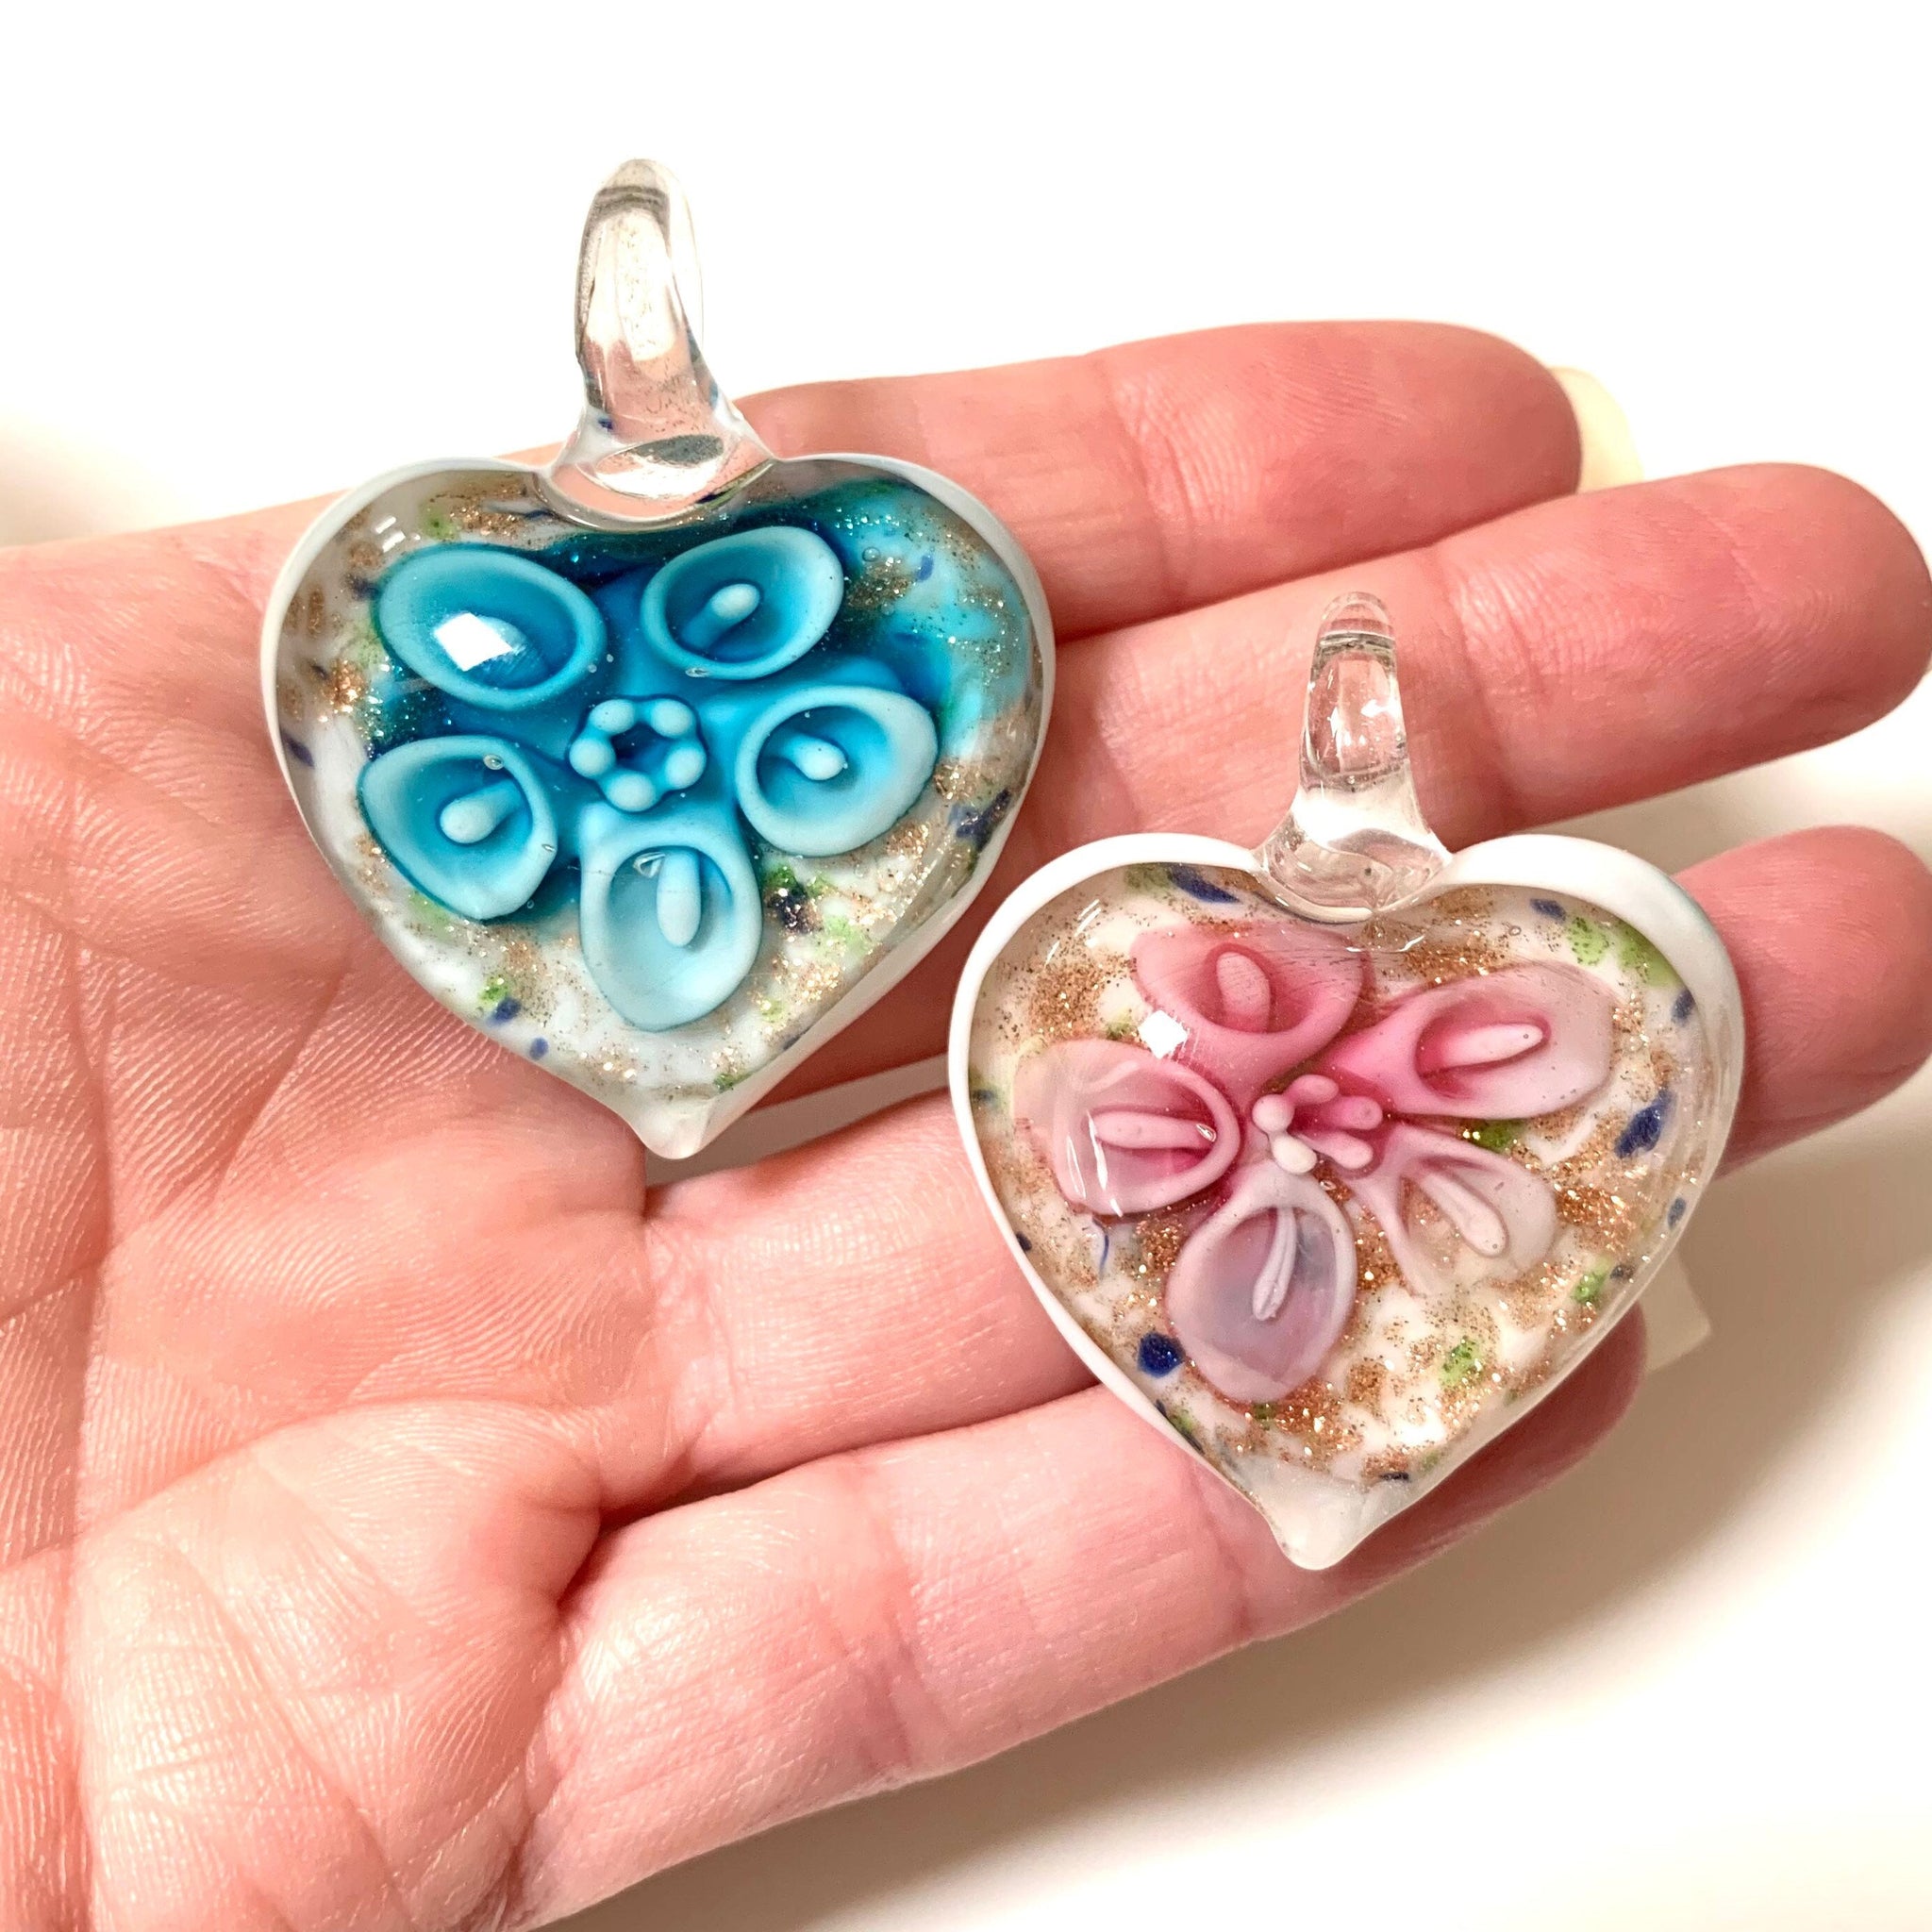 Large Lampwork Pendants - Handmade, Glass Heart Flower Pendants with Gold Sand - Available in 6 Colors